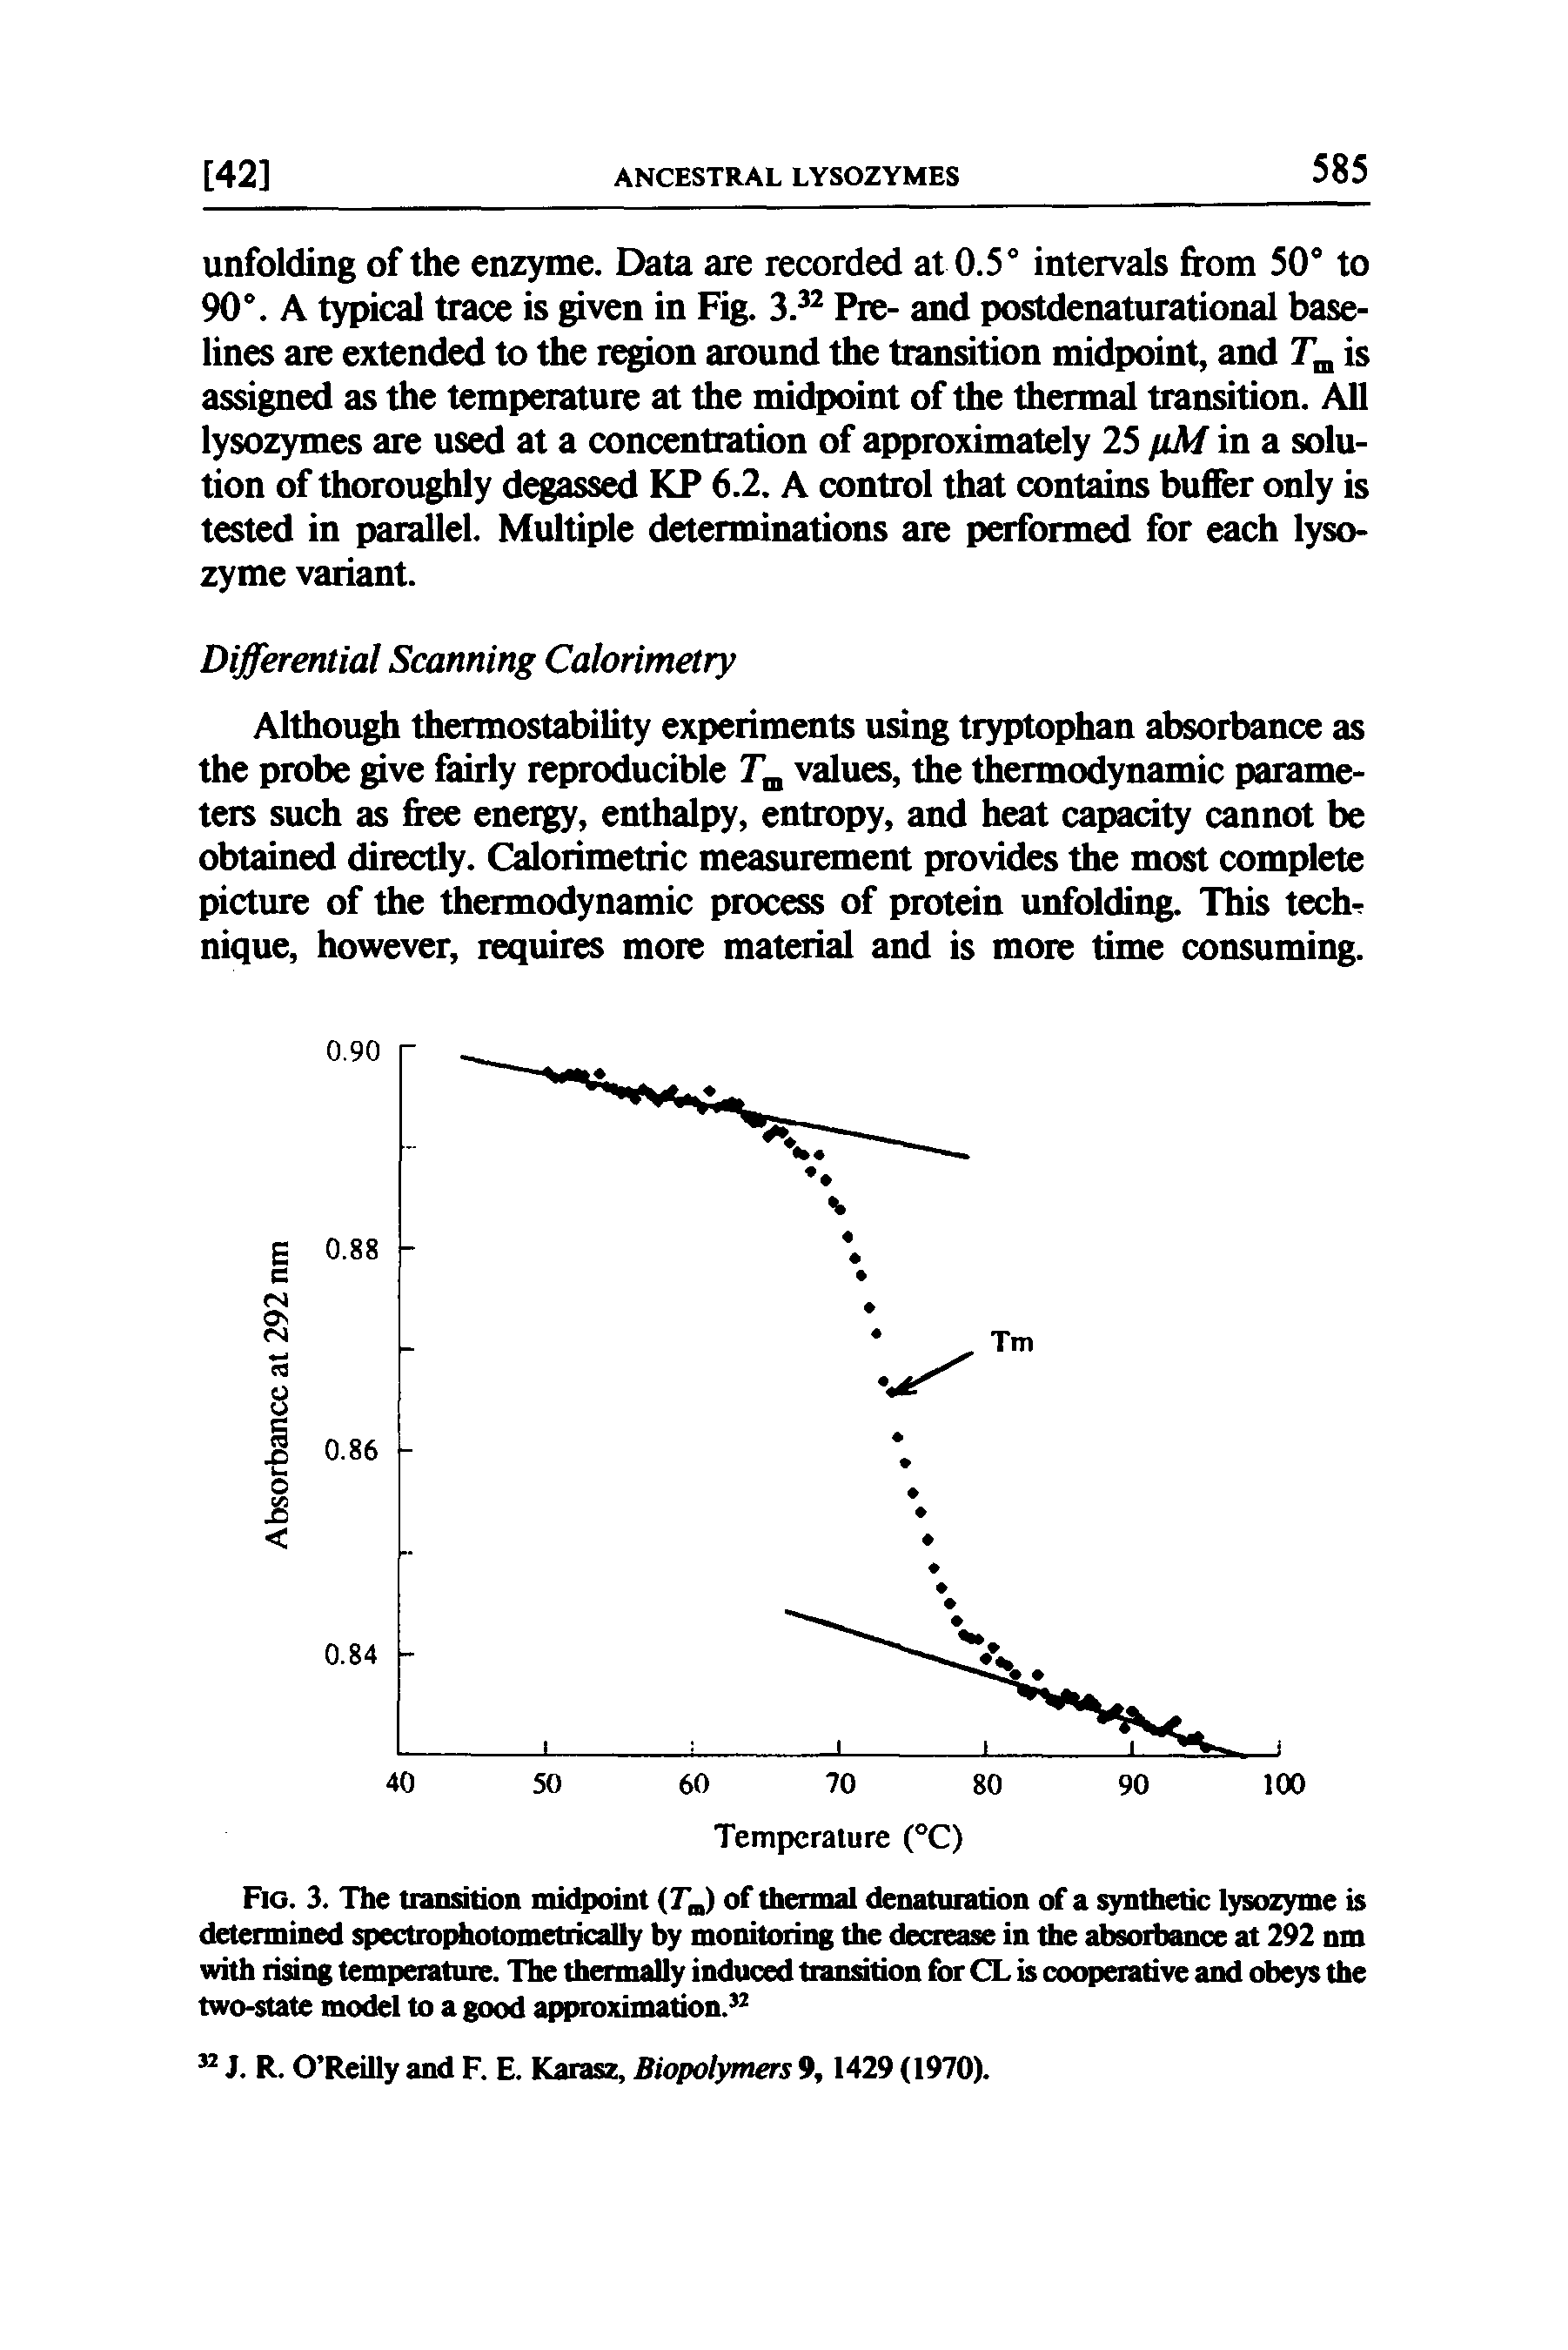 Fig. 3. The transition midpoint (rn) of thermal denaturation of a synthetic lysozyme is determined spectrophotometrically by monitoring the decrease in the absorbance at 292 nm with rising temperature. The thermally induced transition for CL is cooperative and obeys the two-state model to a good approximation.52...